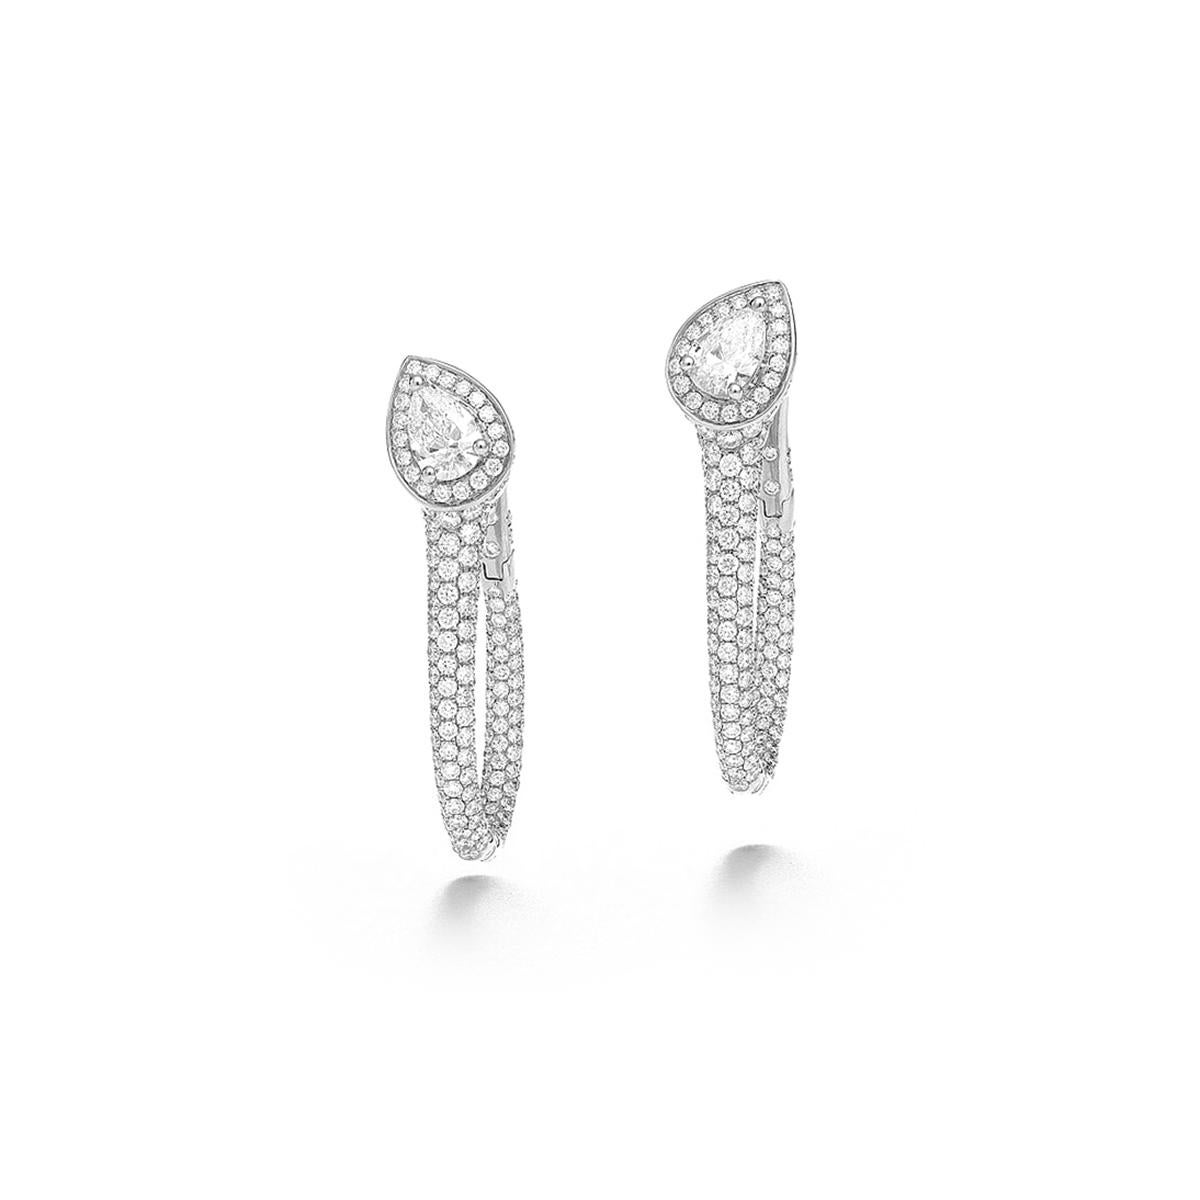 Earrings in 18kt white gold set with 442 diamonds 3.23 cts and 2 pear-shaped cut diamonds 0.78 cts     